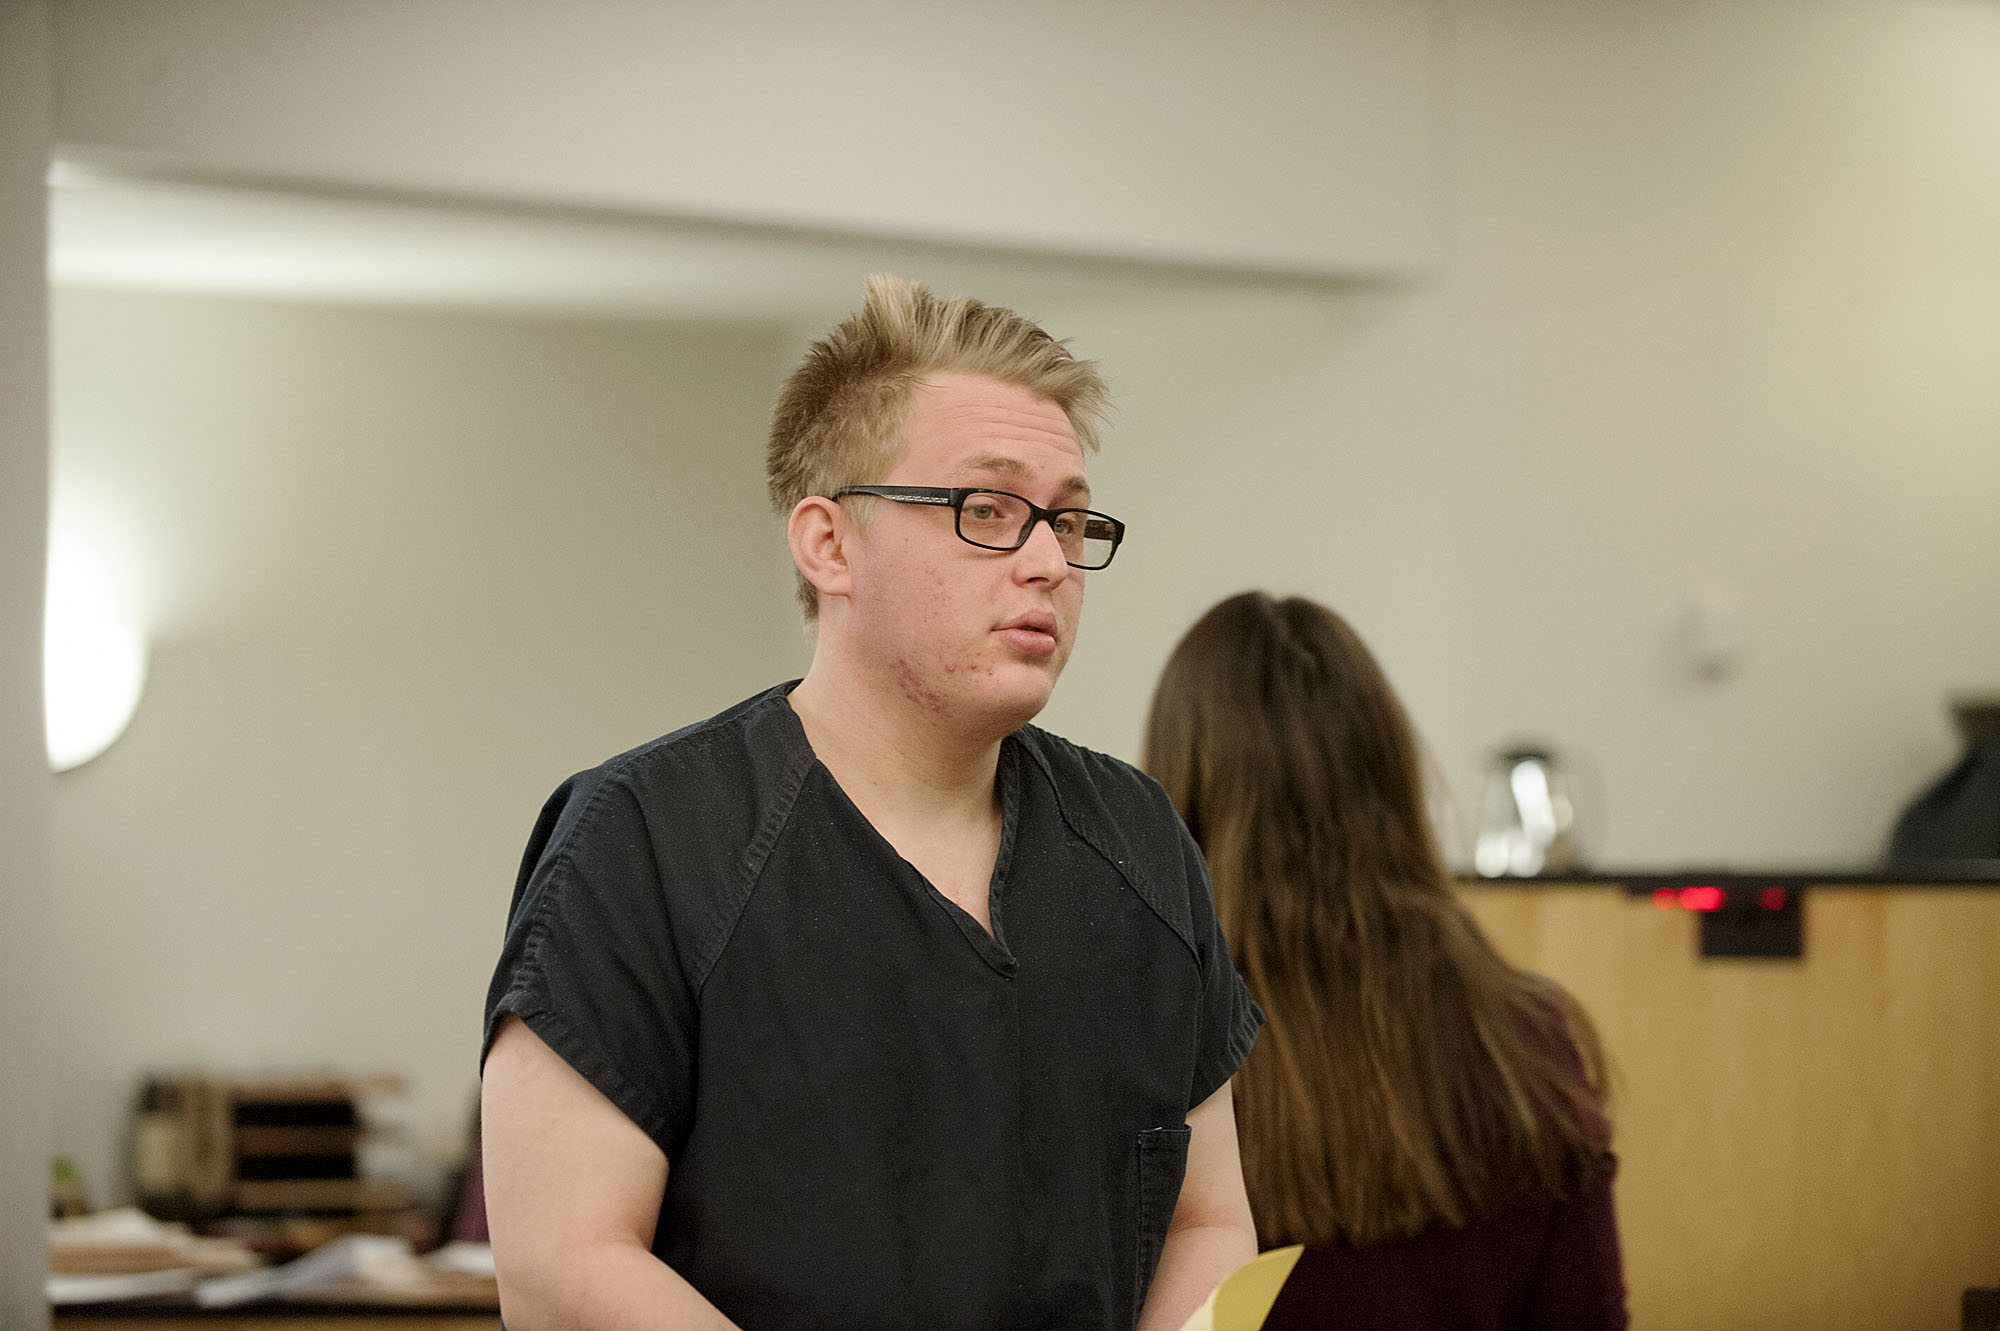 Zachary Akers, 20, of Camas makes a first appearance  Jan. 6 in Clark County Superior Court in connection with a child pornography and online child exploitation investigation. Akers appeared Thursday for the fifth time on new allegations related to the investigation. He already faces 27 counts between the four other pending cases.